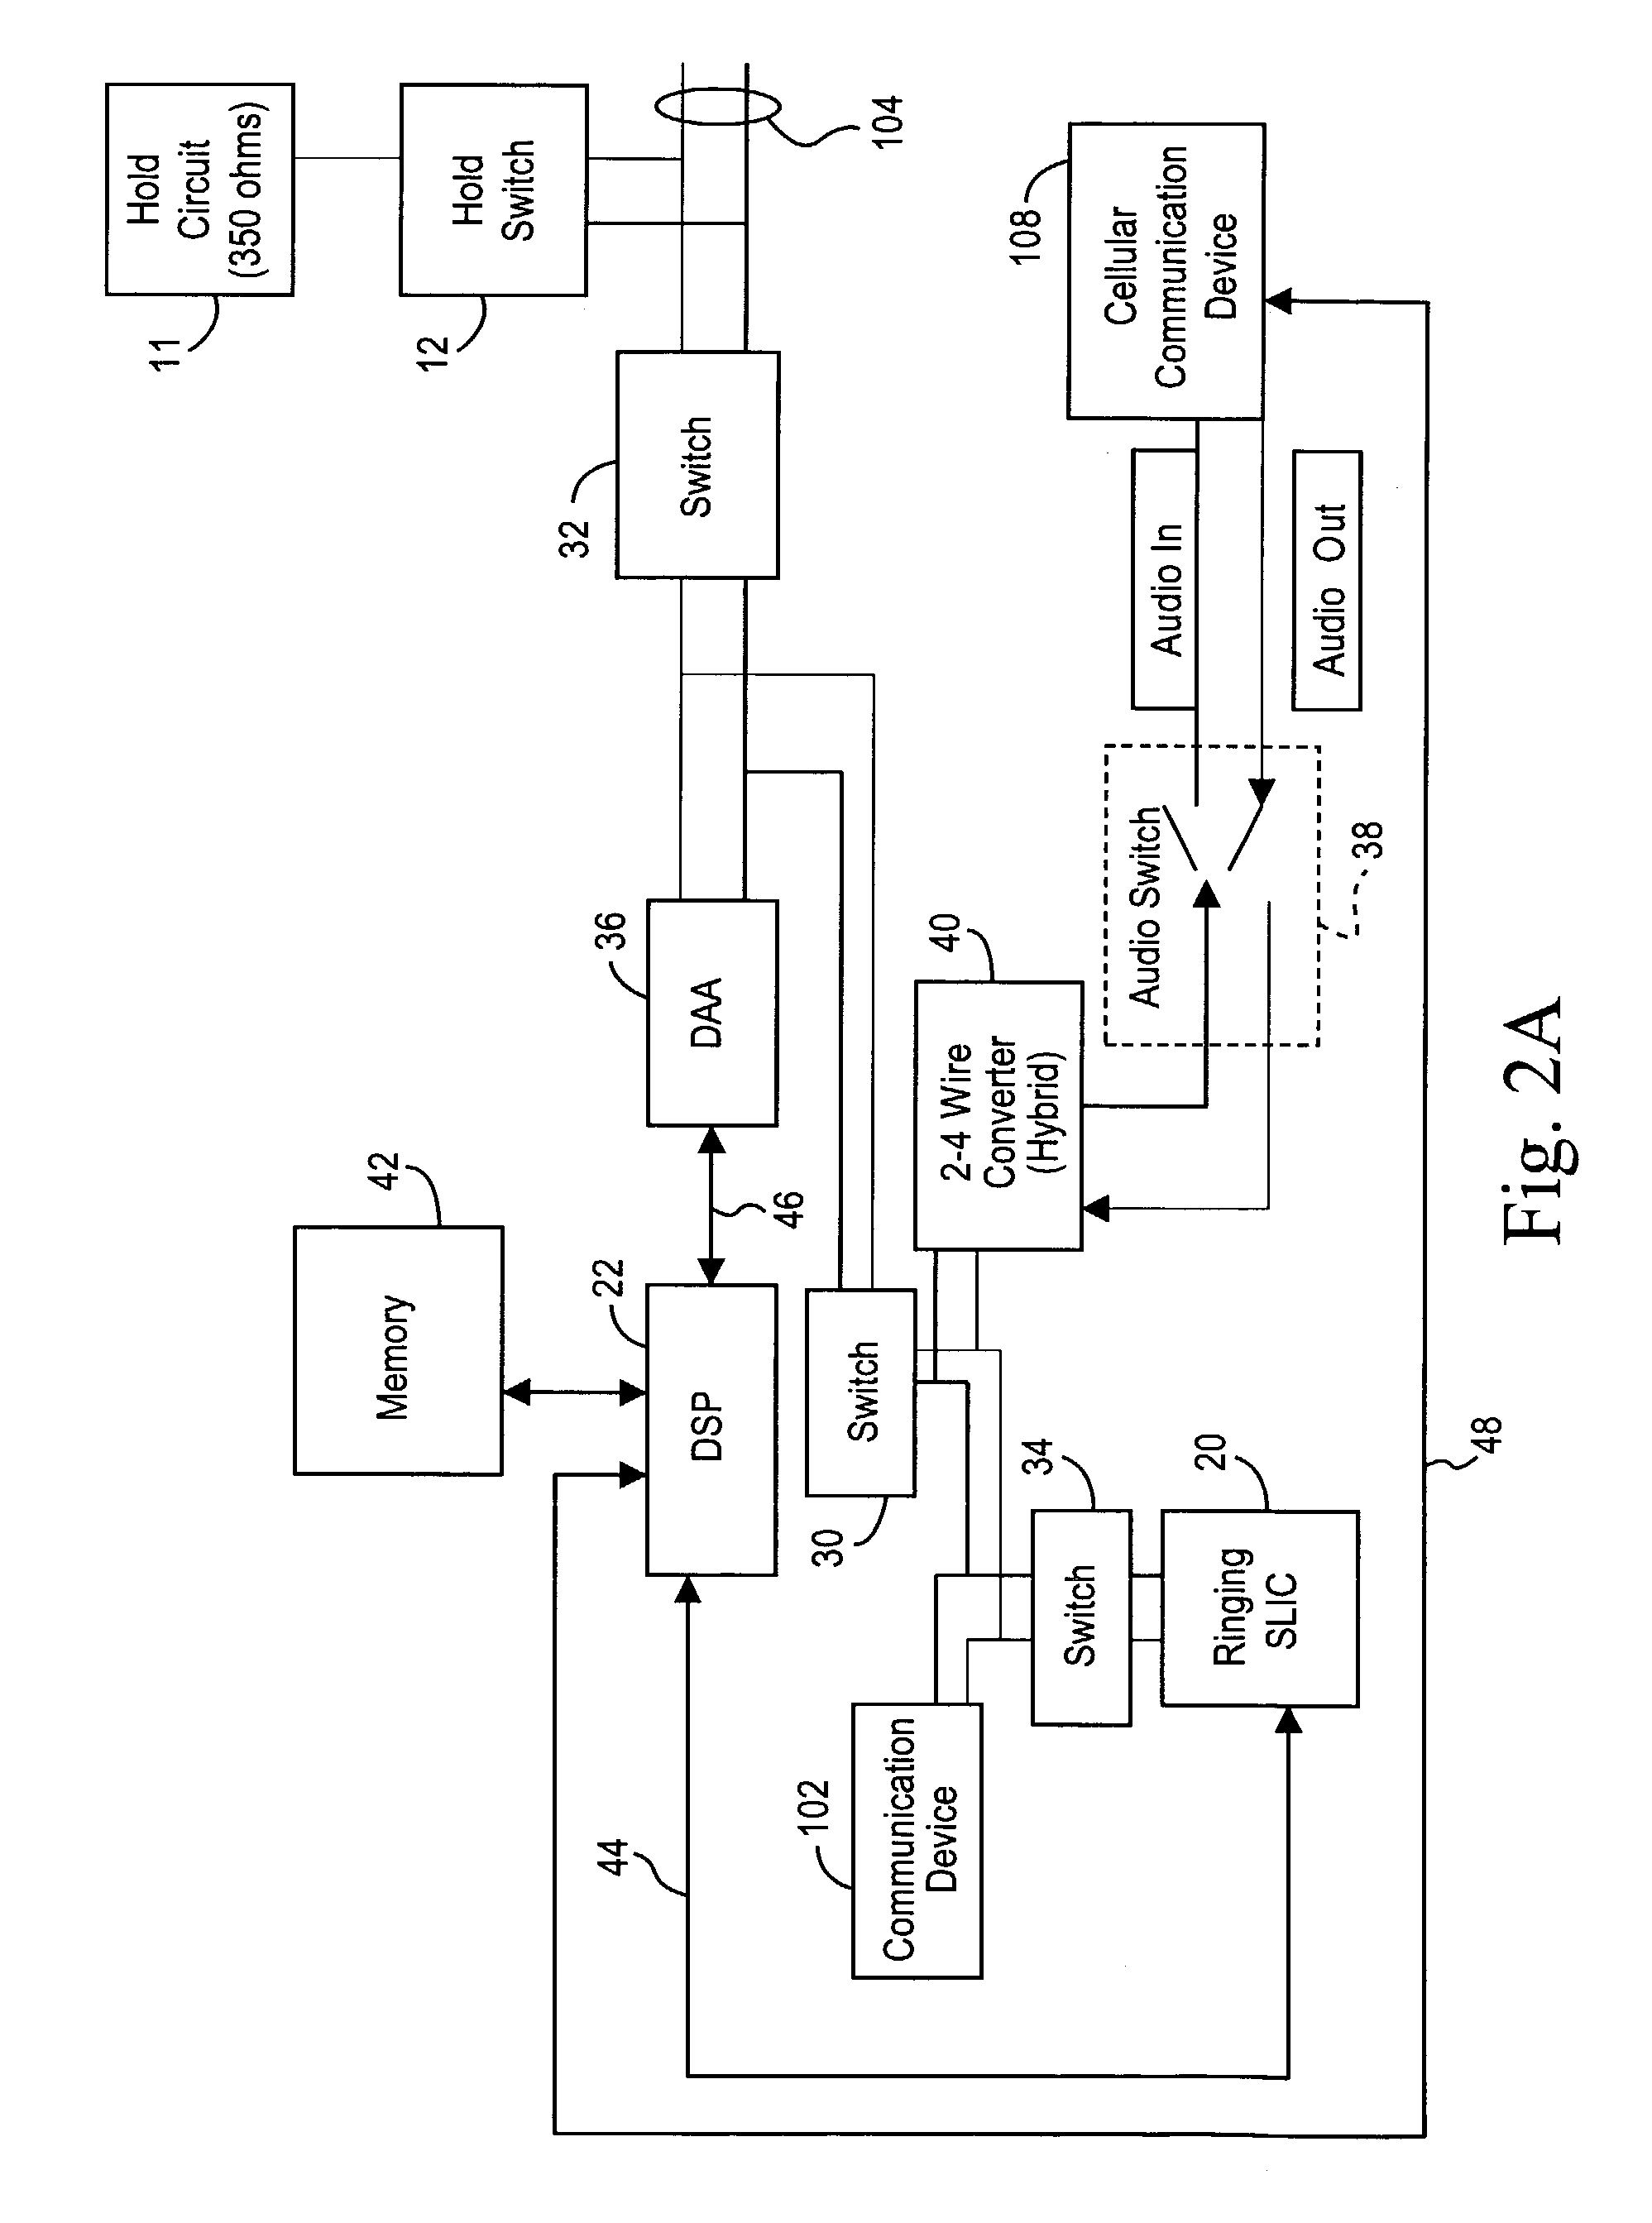 Communication system for landline and wireless calls